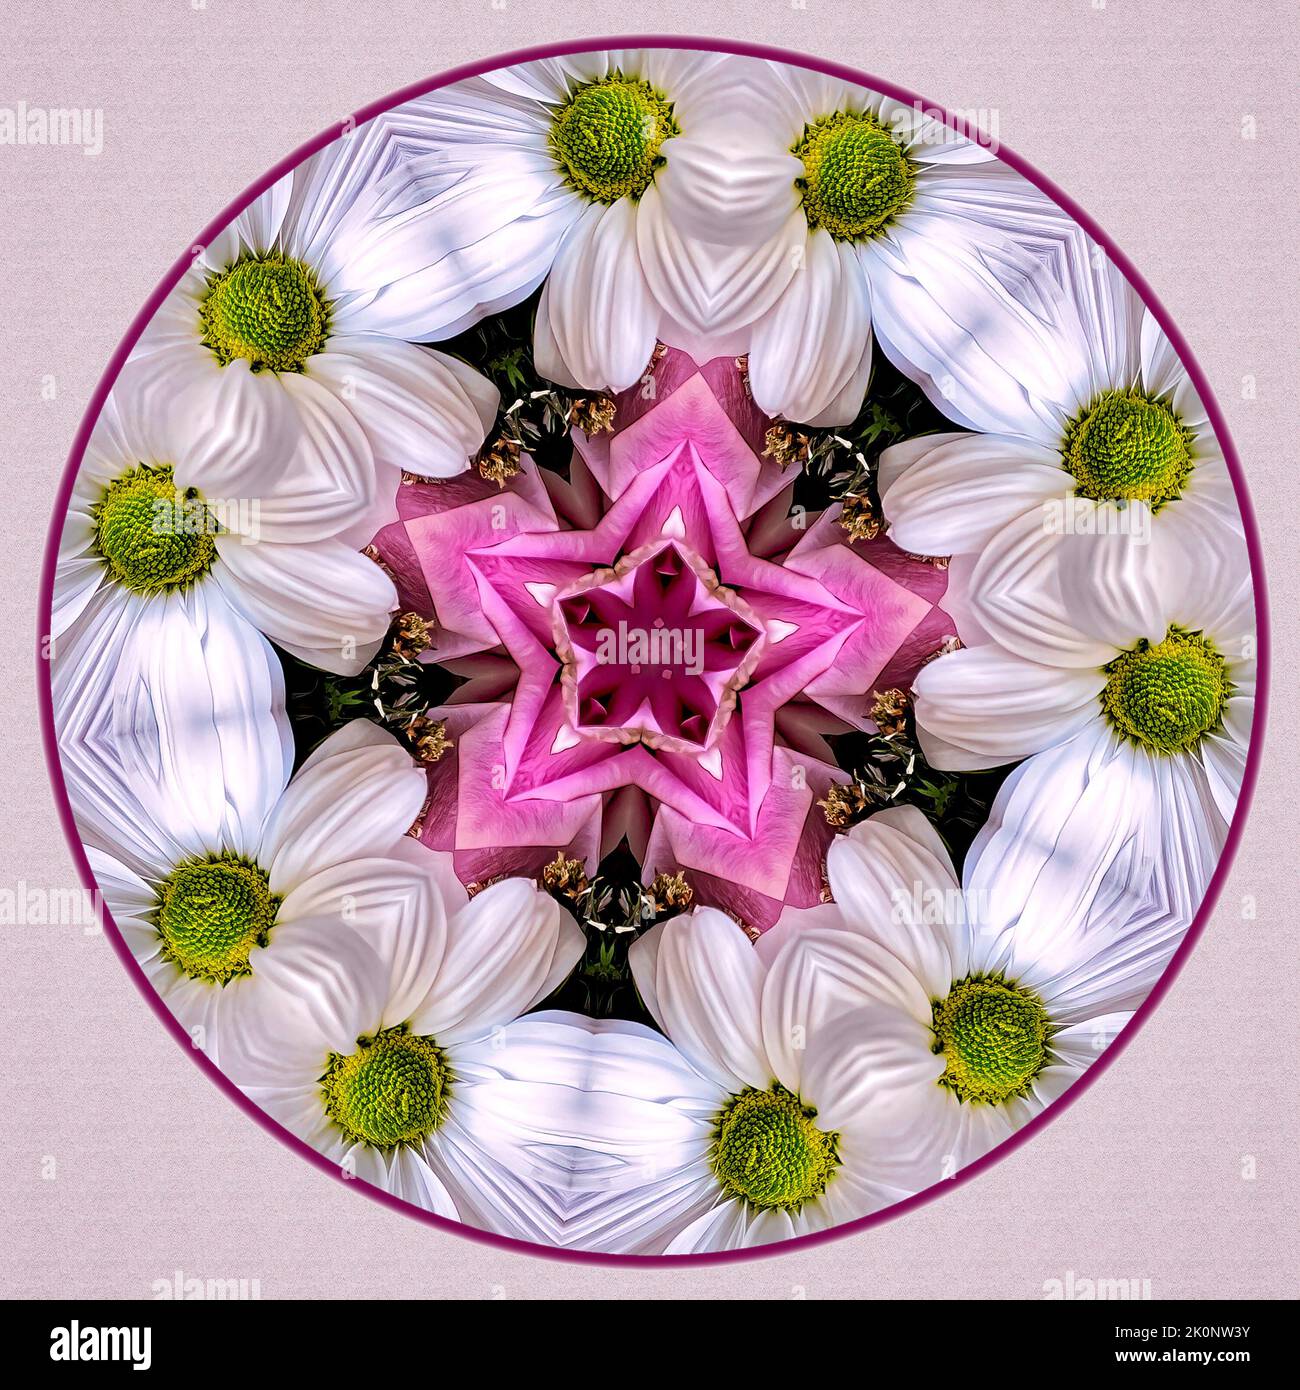 Mandala Floral Kaleidoscope Pattern: Kaleidoscope photography produced this abstract, geometric, floral pattern. Stock Photo